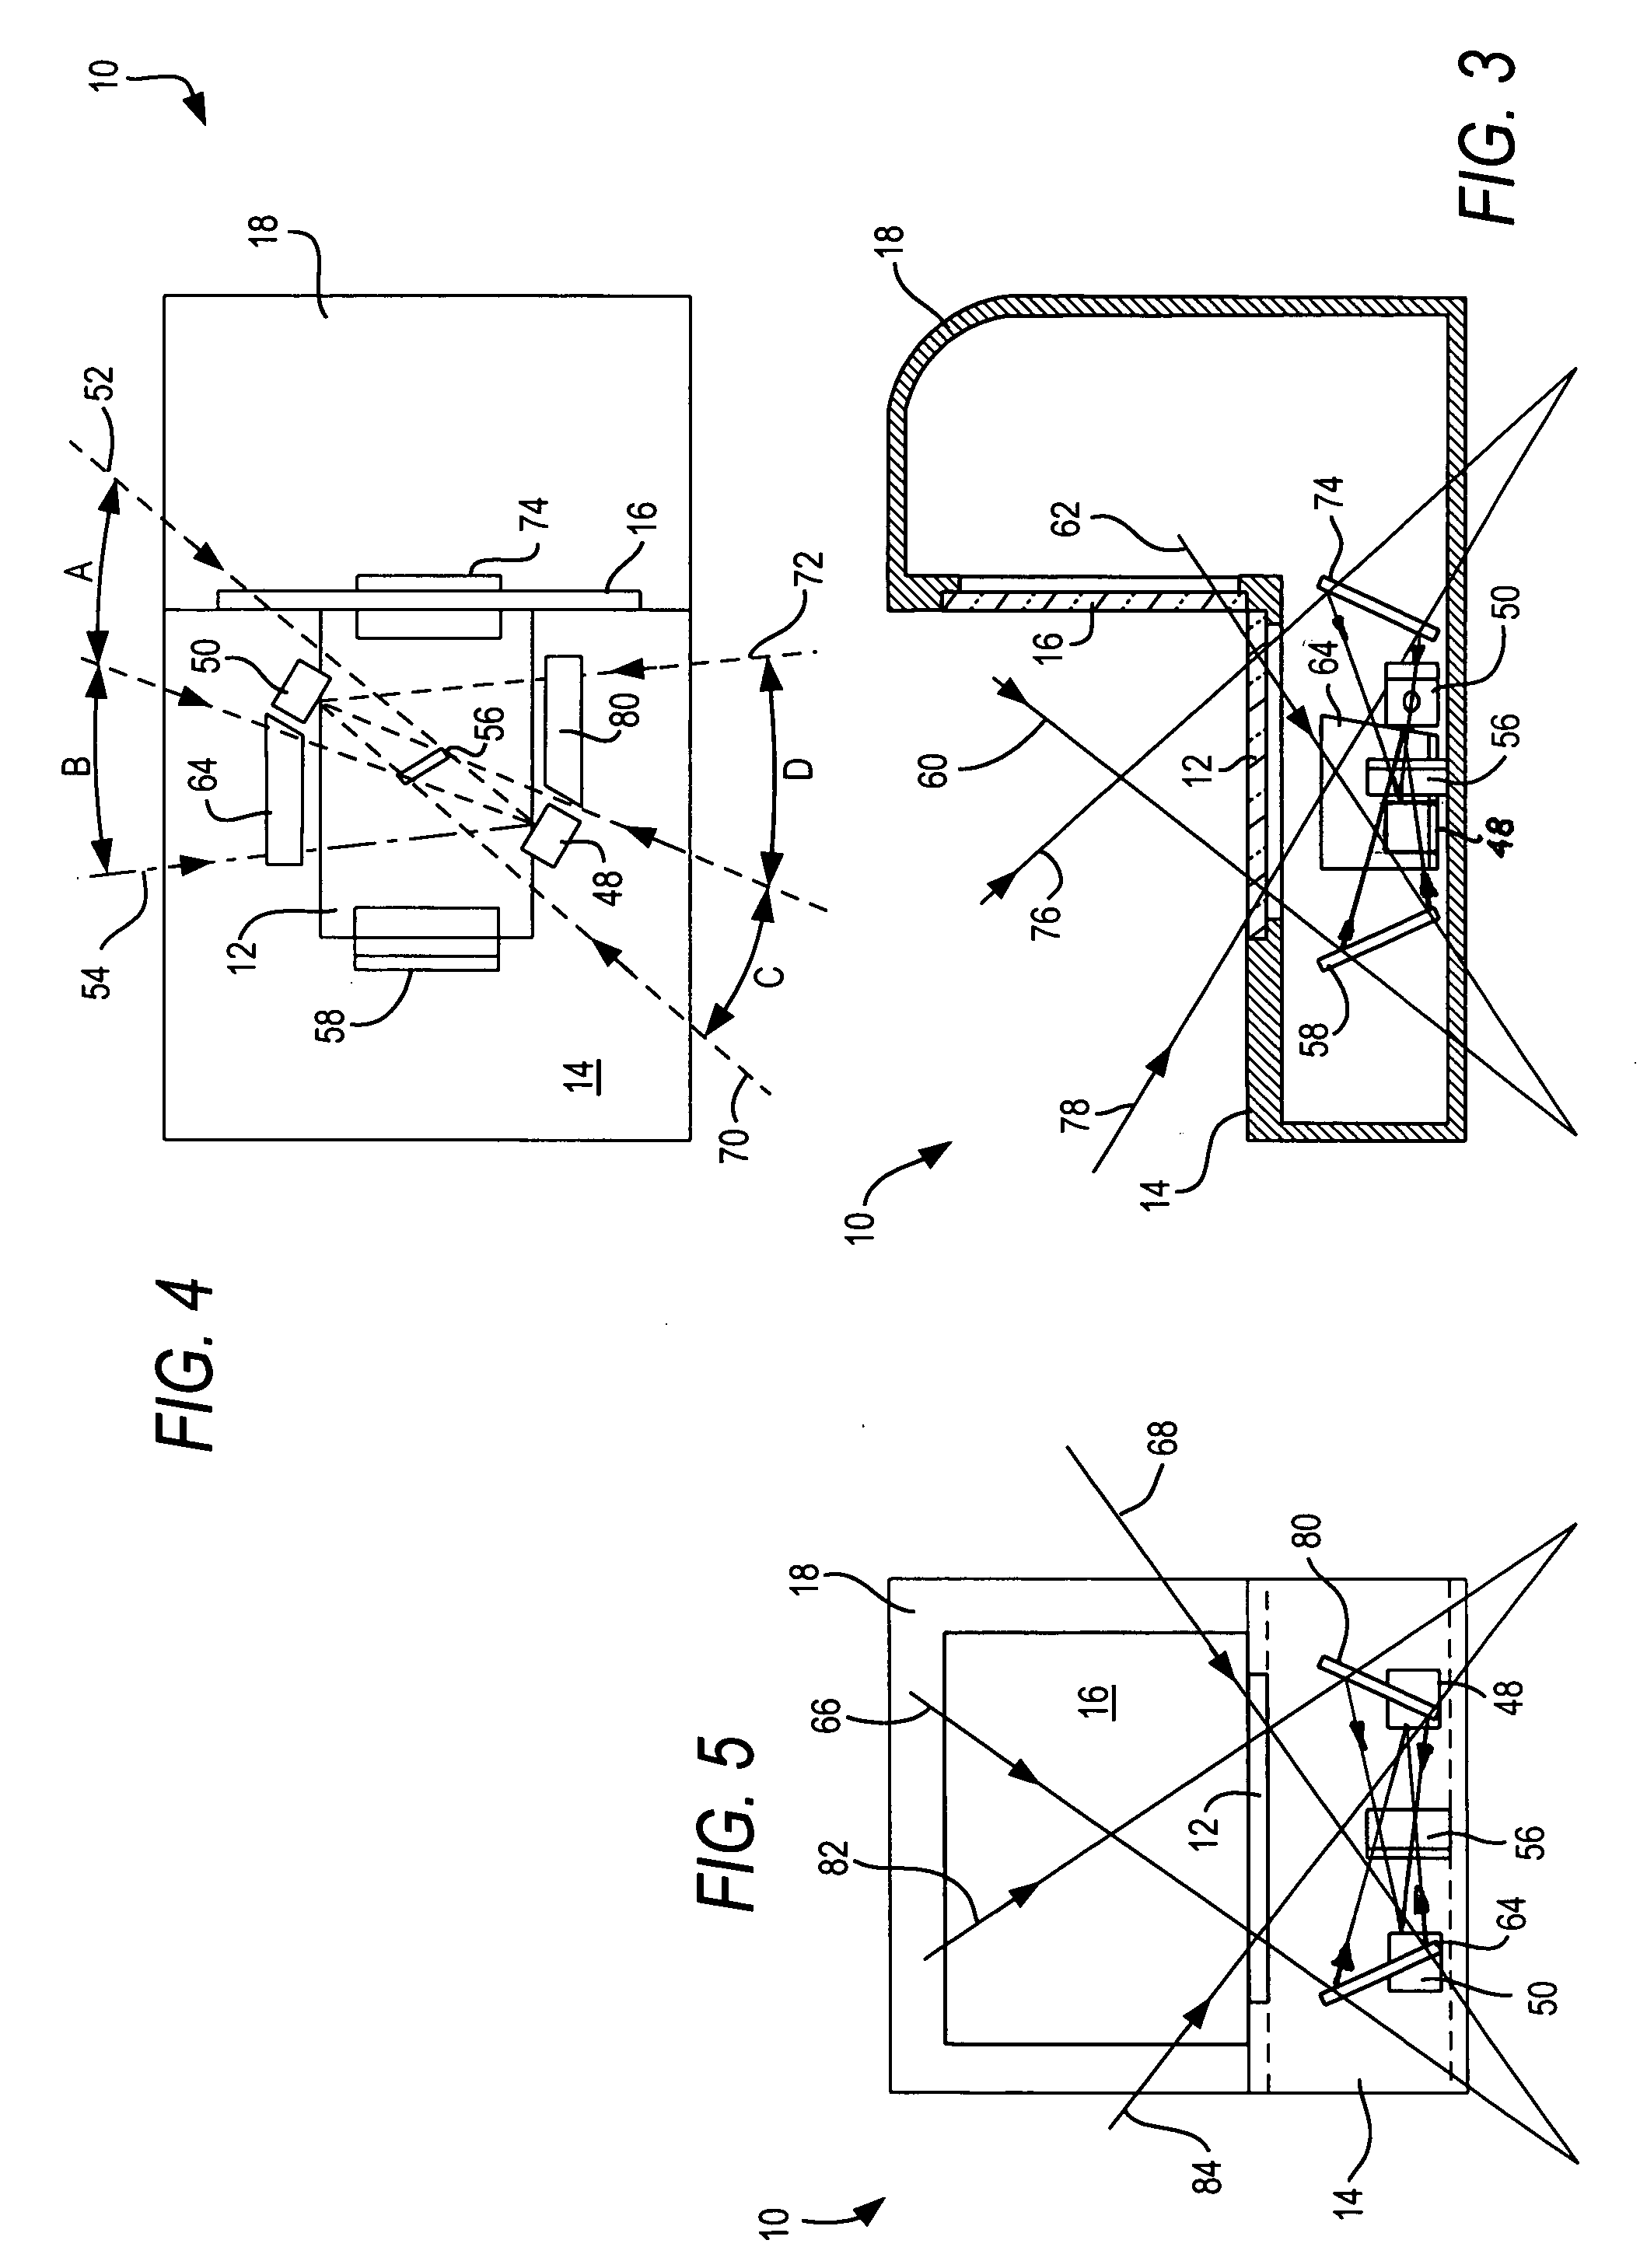 Point-of-transaction workstation for electro-optically reading one-dimensional and two-dimensional indicia by image capture